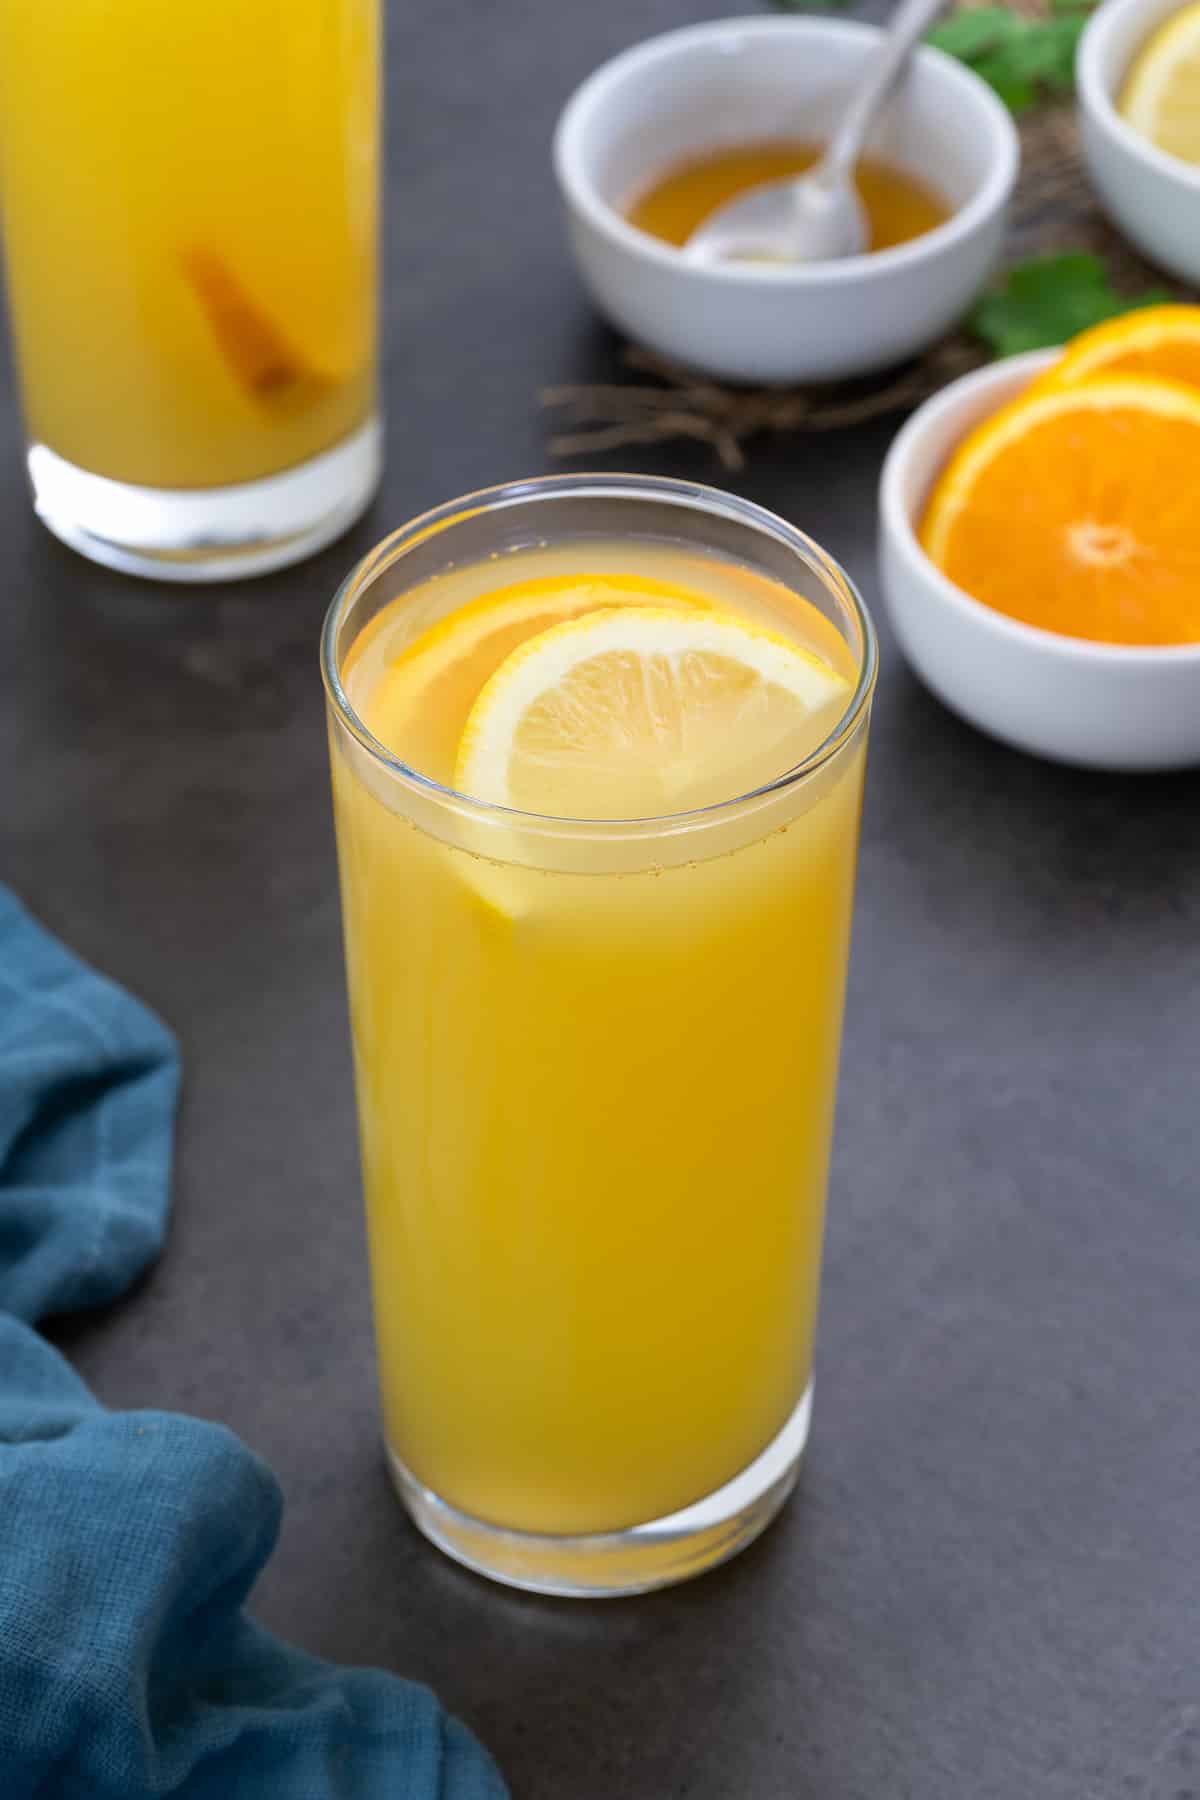 Homemade electrolyte drink in two glasses with orange slices and honey around.